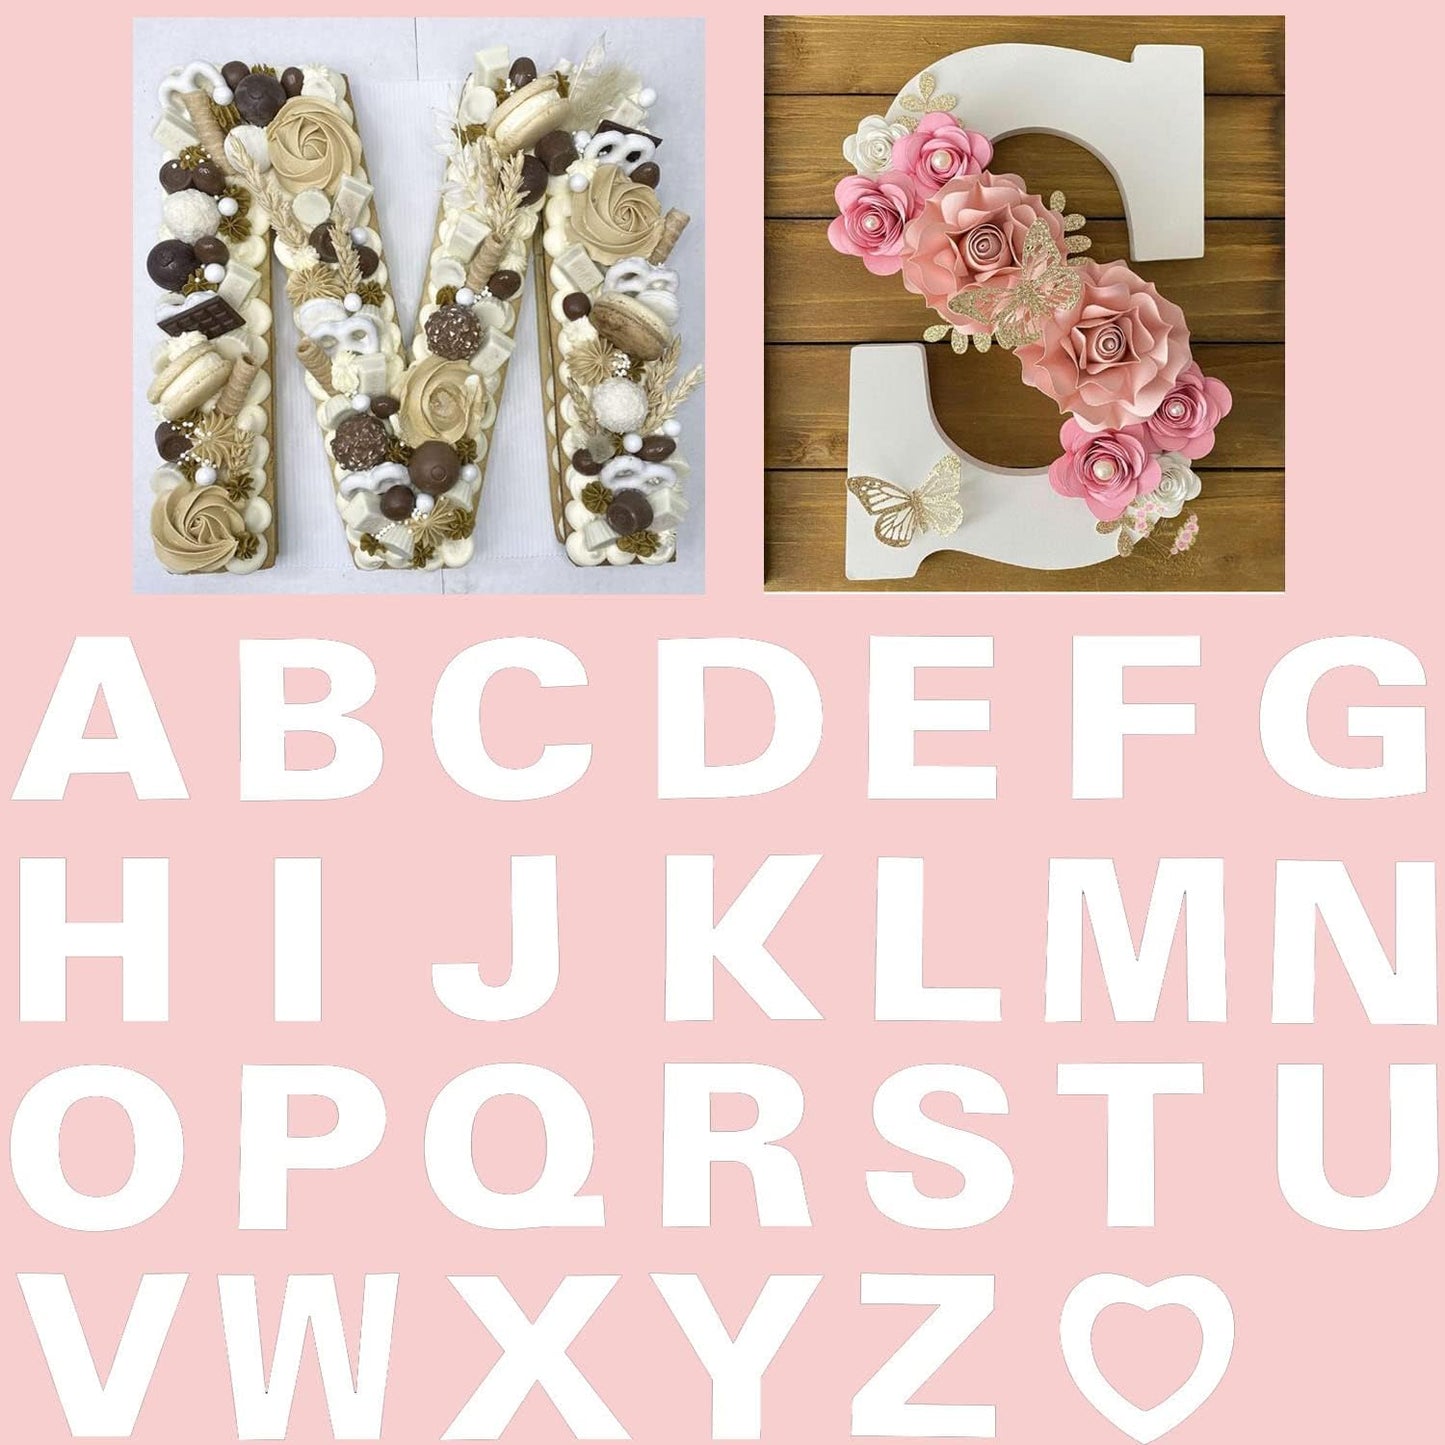 A to Z Alphabet Letter Cake Stencils -30.4 cm (Pack of 1)